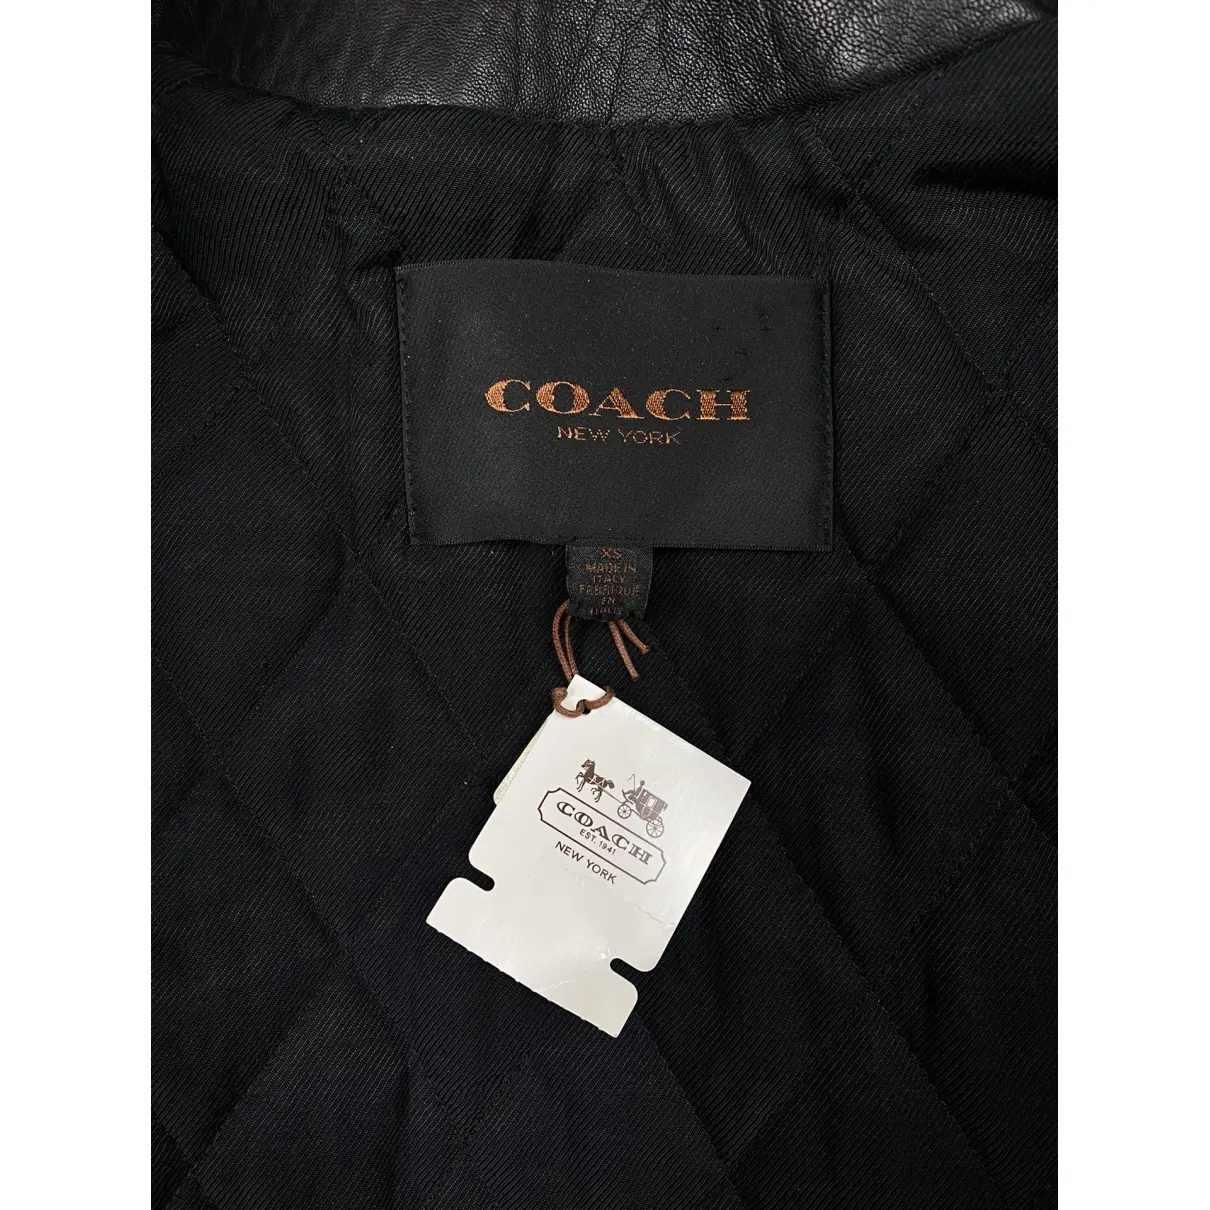 Buy Coach Leather jacket online